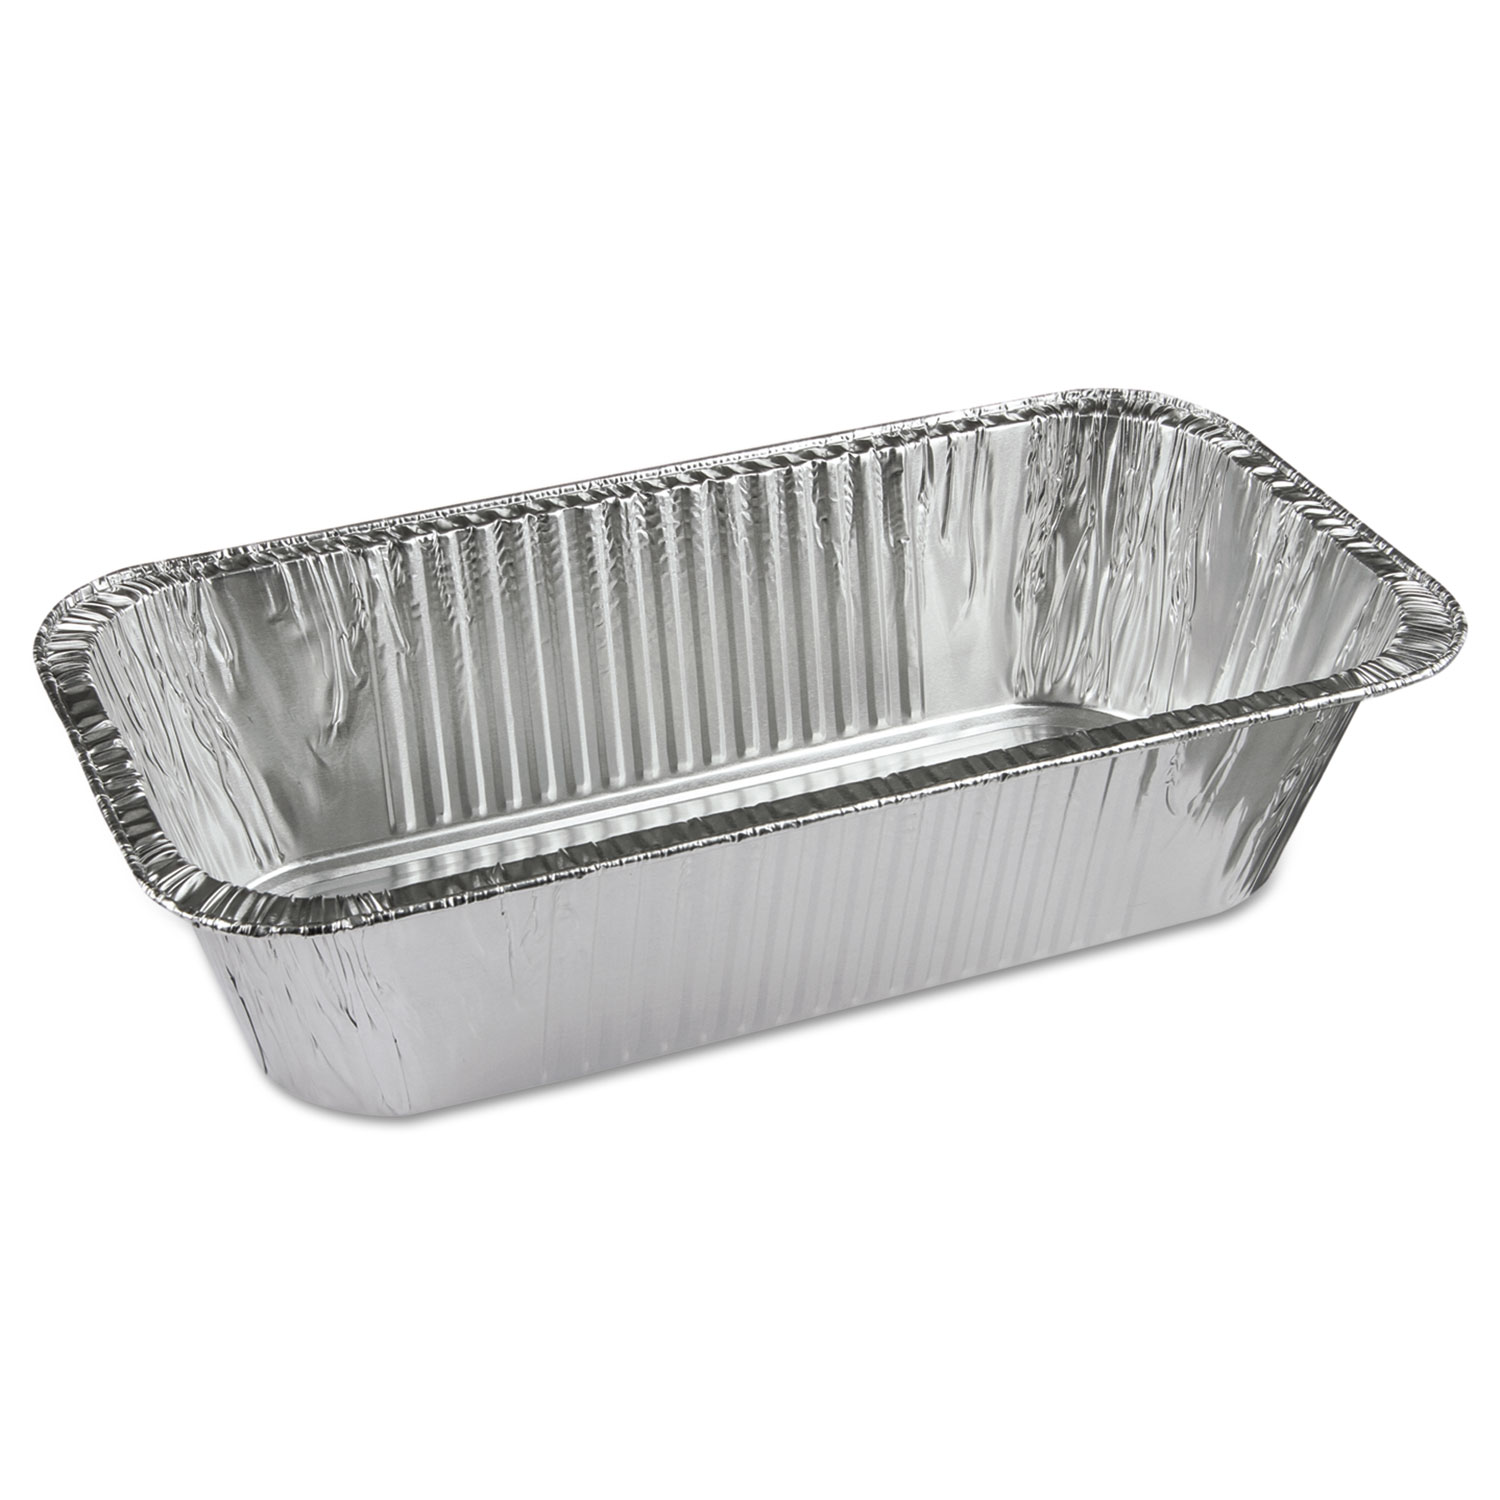  Pactiv Y6062XH Aluminum Bread/Loaf Pans, Ribbed 1/3-Size, 8.04 x 5.9 x 3, 200/Carton (PCTY6062XH) 